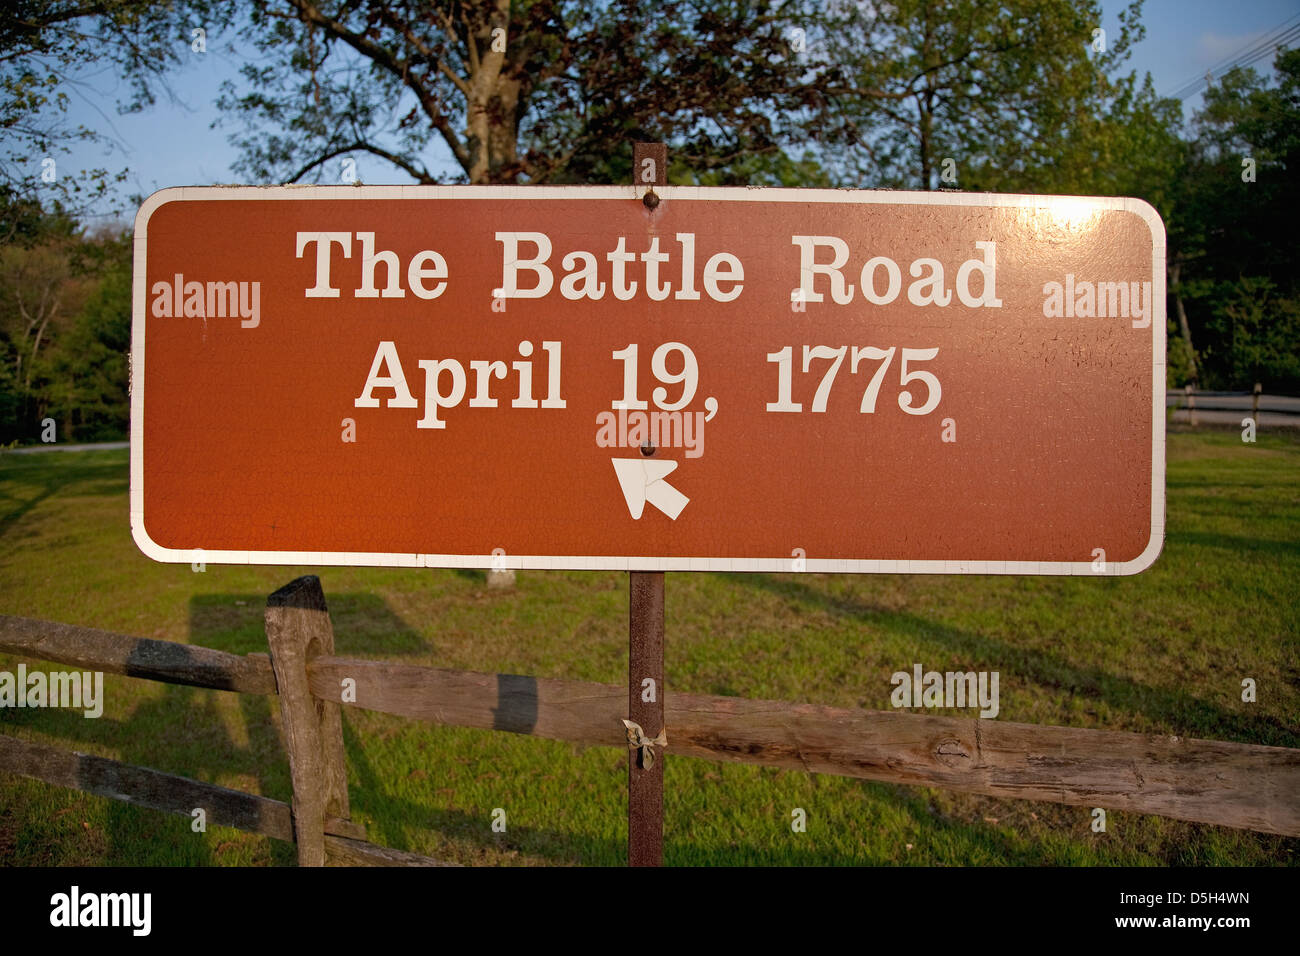 Sign for 'The Battle Road' for April 19, 1775 in historic Concord/Lexington area where Revolutionary War started Stock Photo